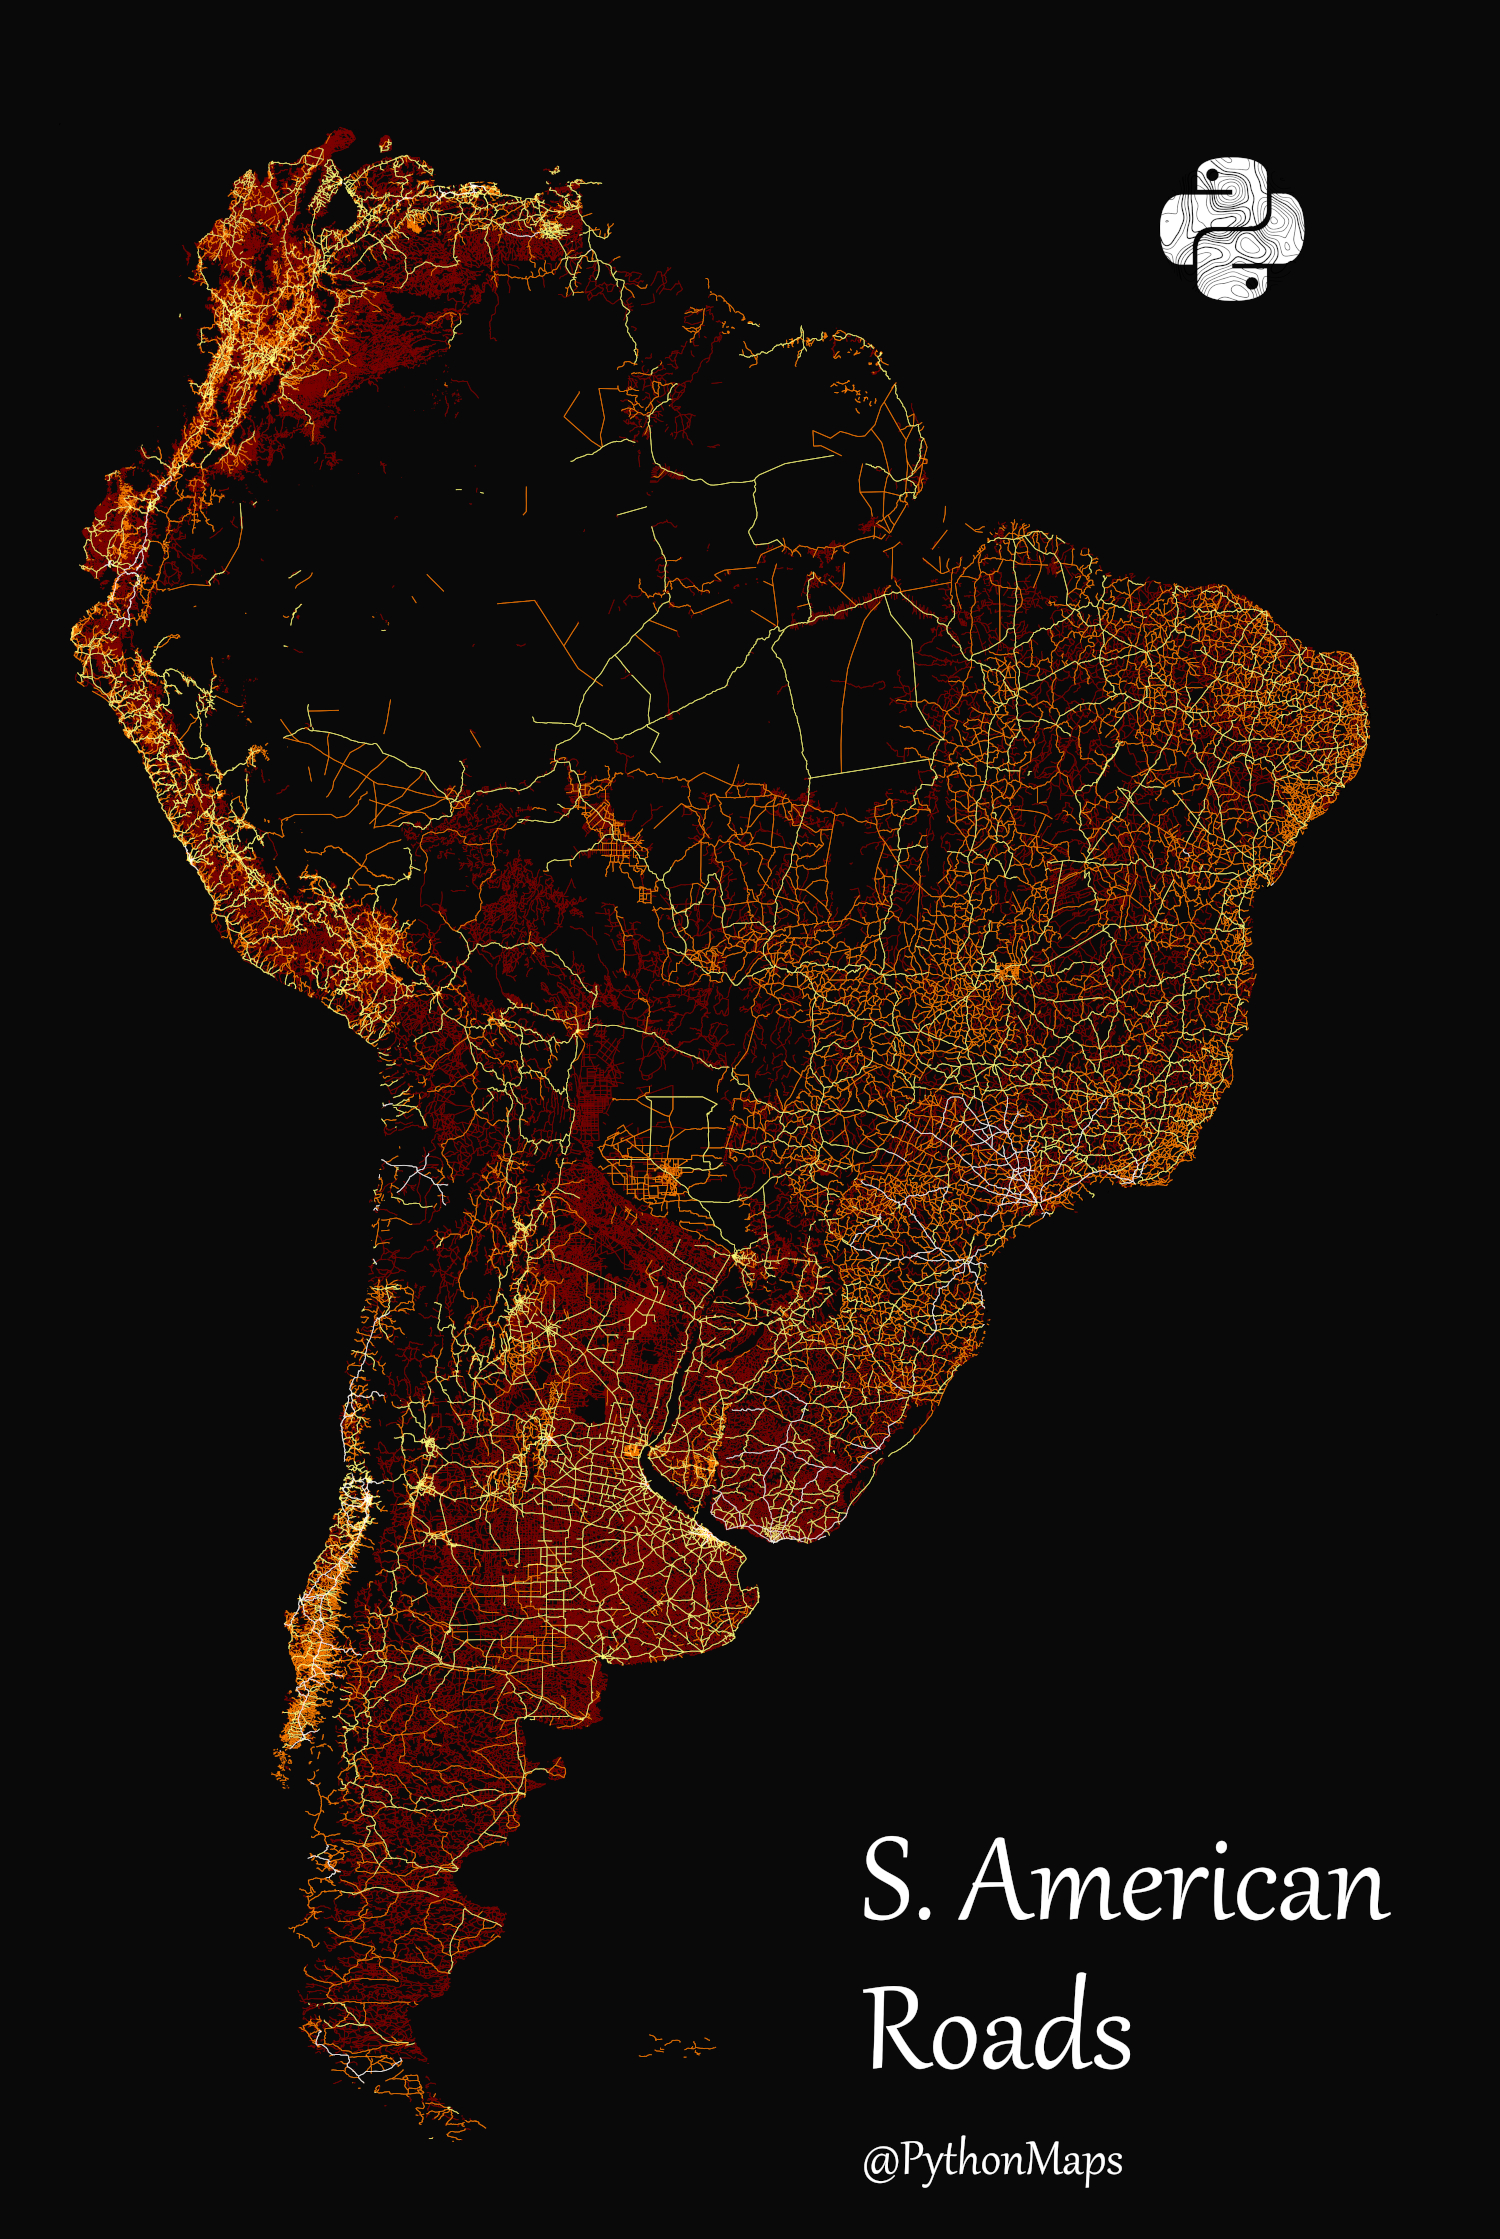 A map of all roads in South America, visualized by type.